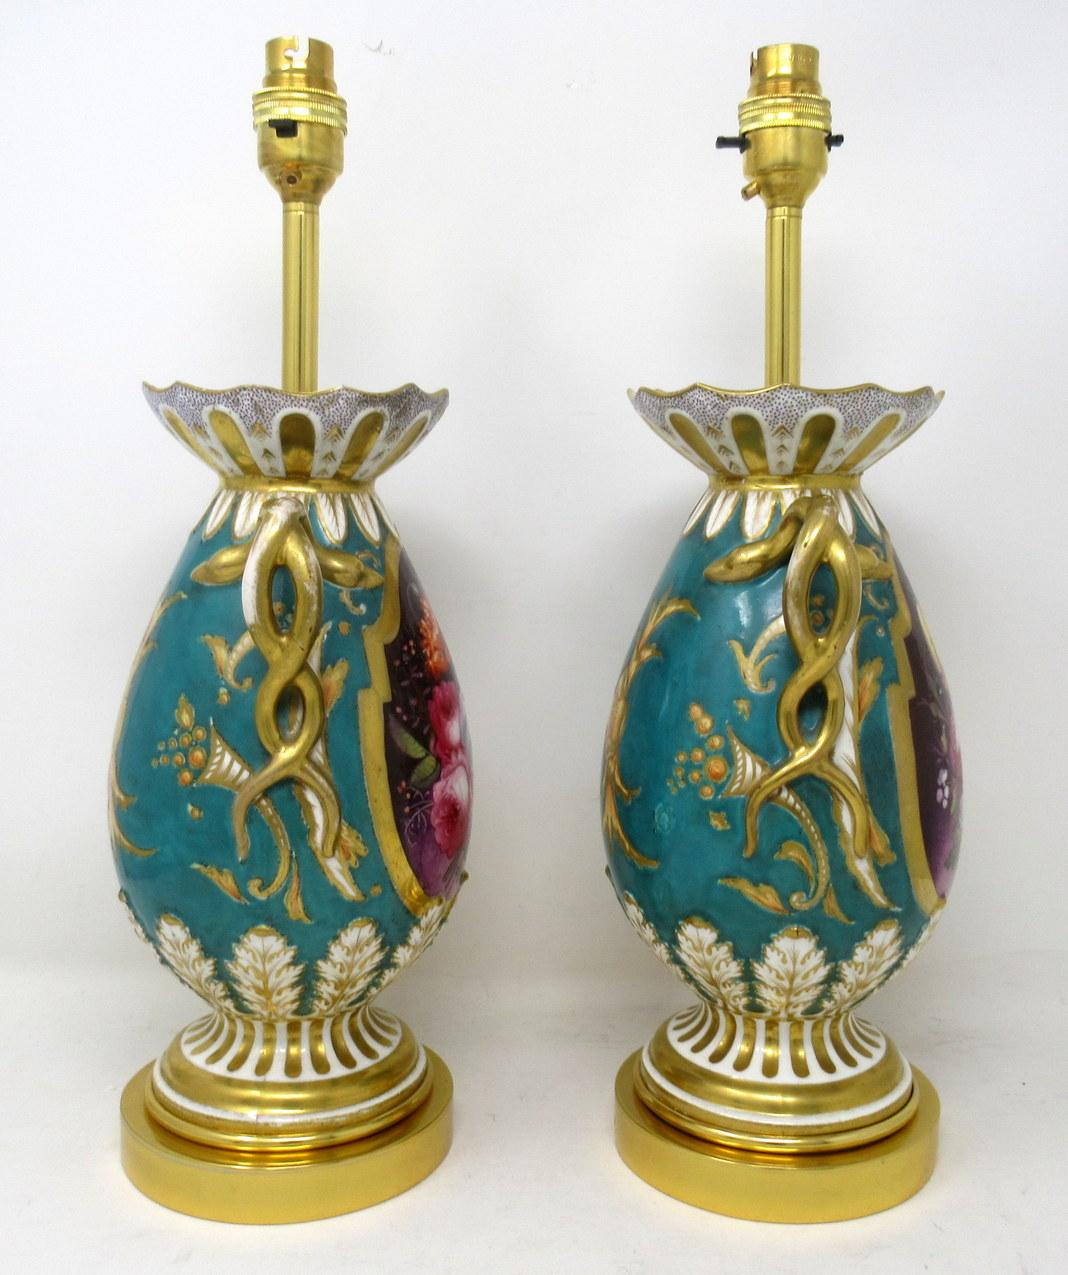 Ceramic Antique Pair English Staffordshire Porcelain Table Lamps Ridgway or Rockingham For Sale